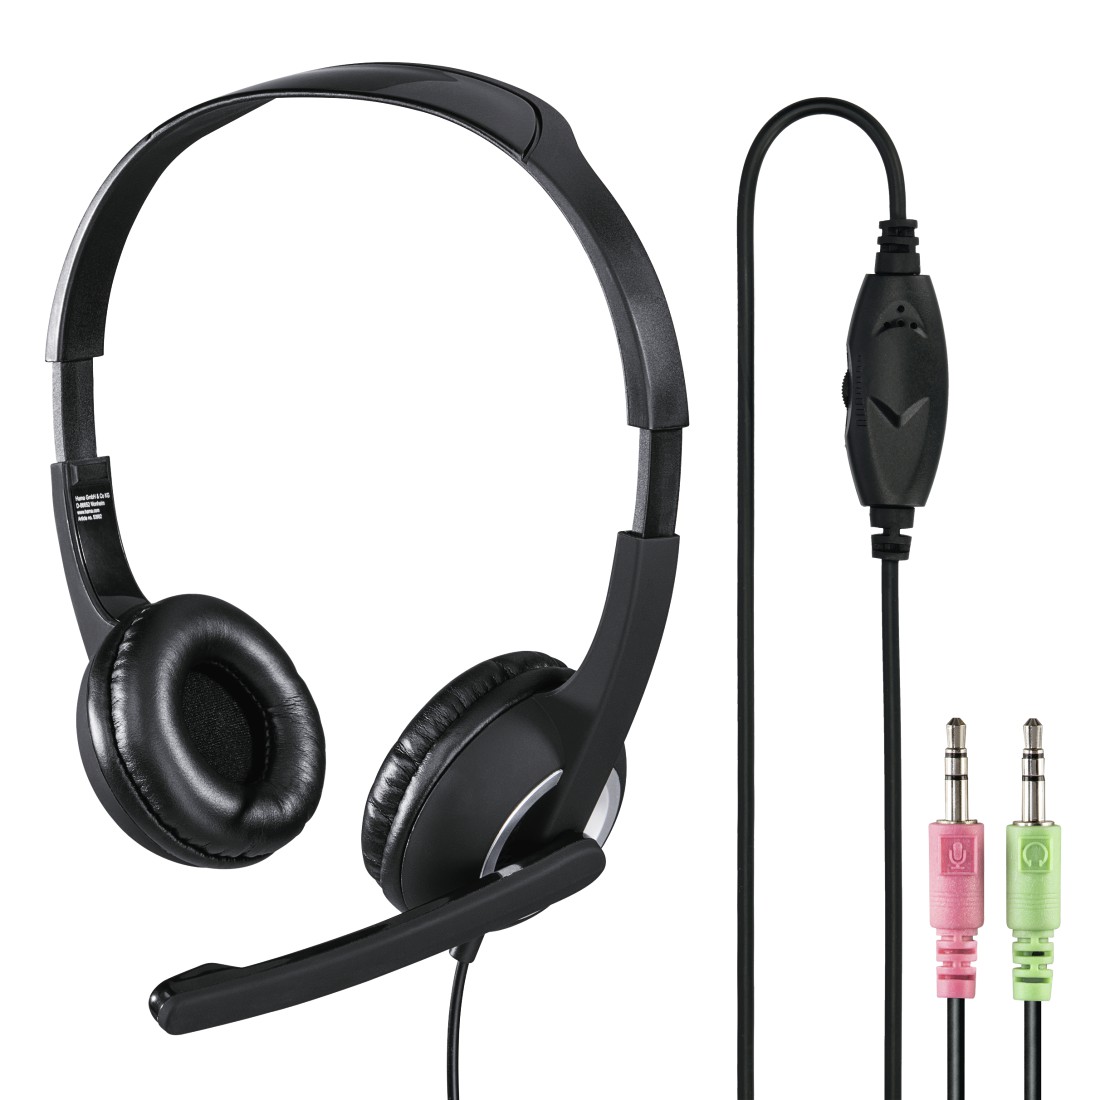 Hama HS-P150 PC Office Stereo Headset